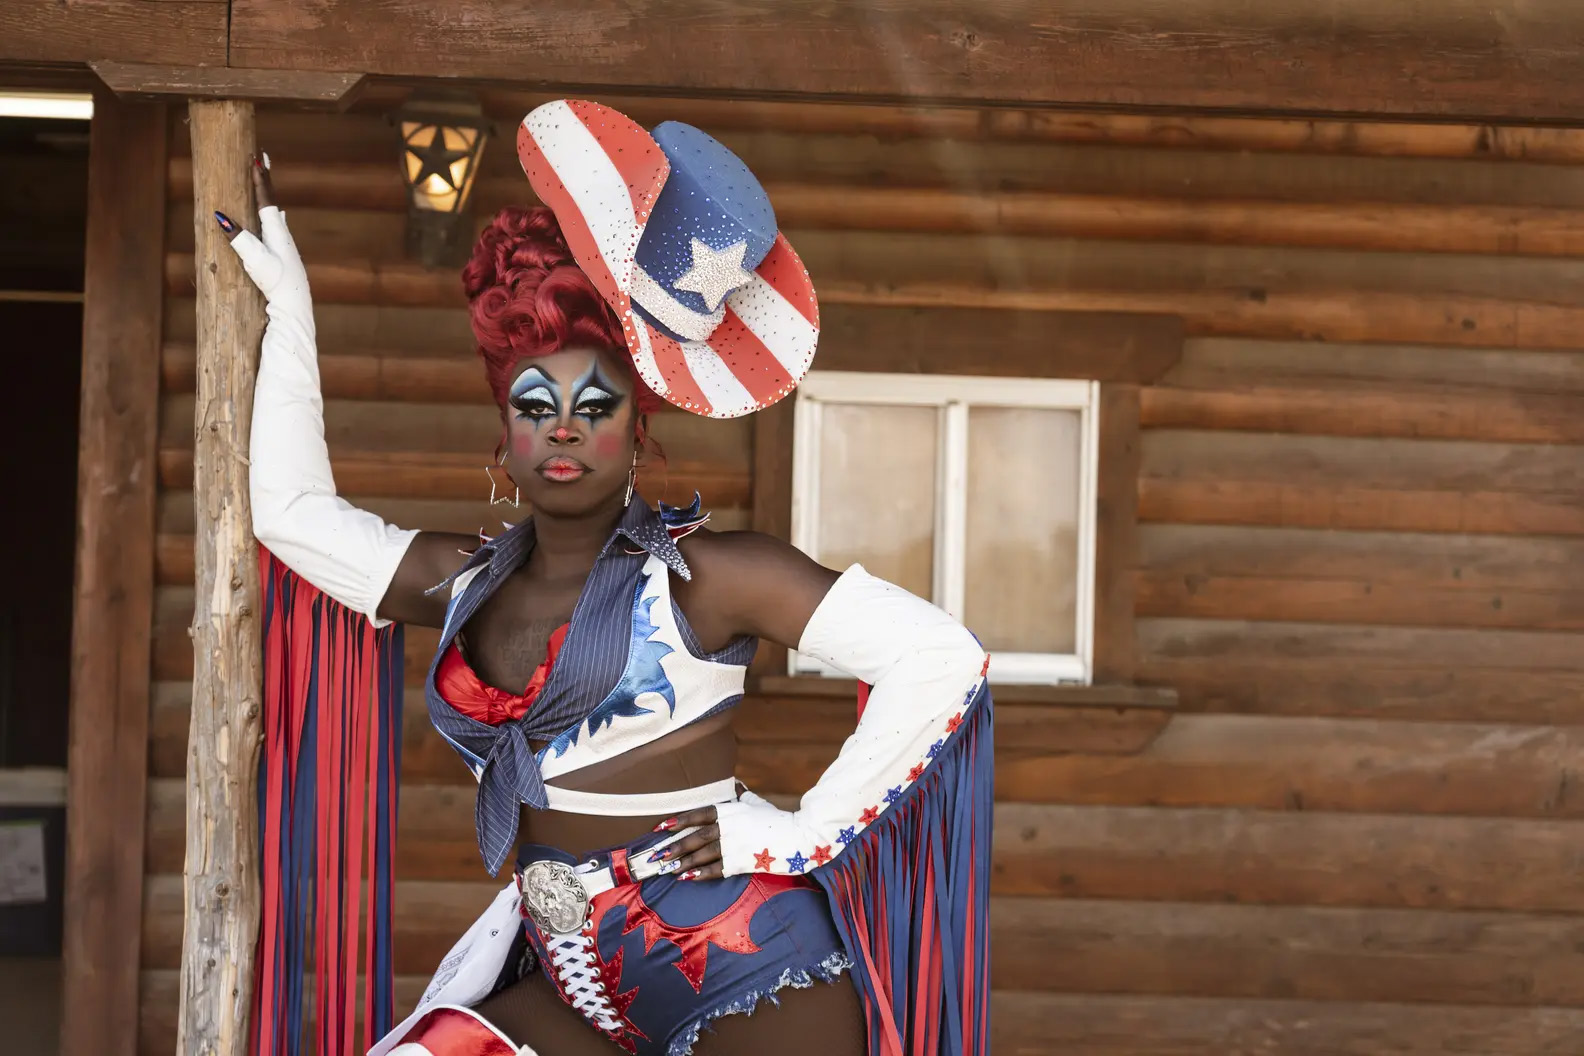 A person dressed in drag strikes a pose. He's wearing a western-themed red, white and blue outfit and heavy makeup. This is Bob, a drag queen.